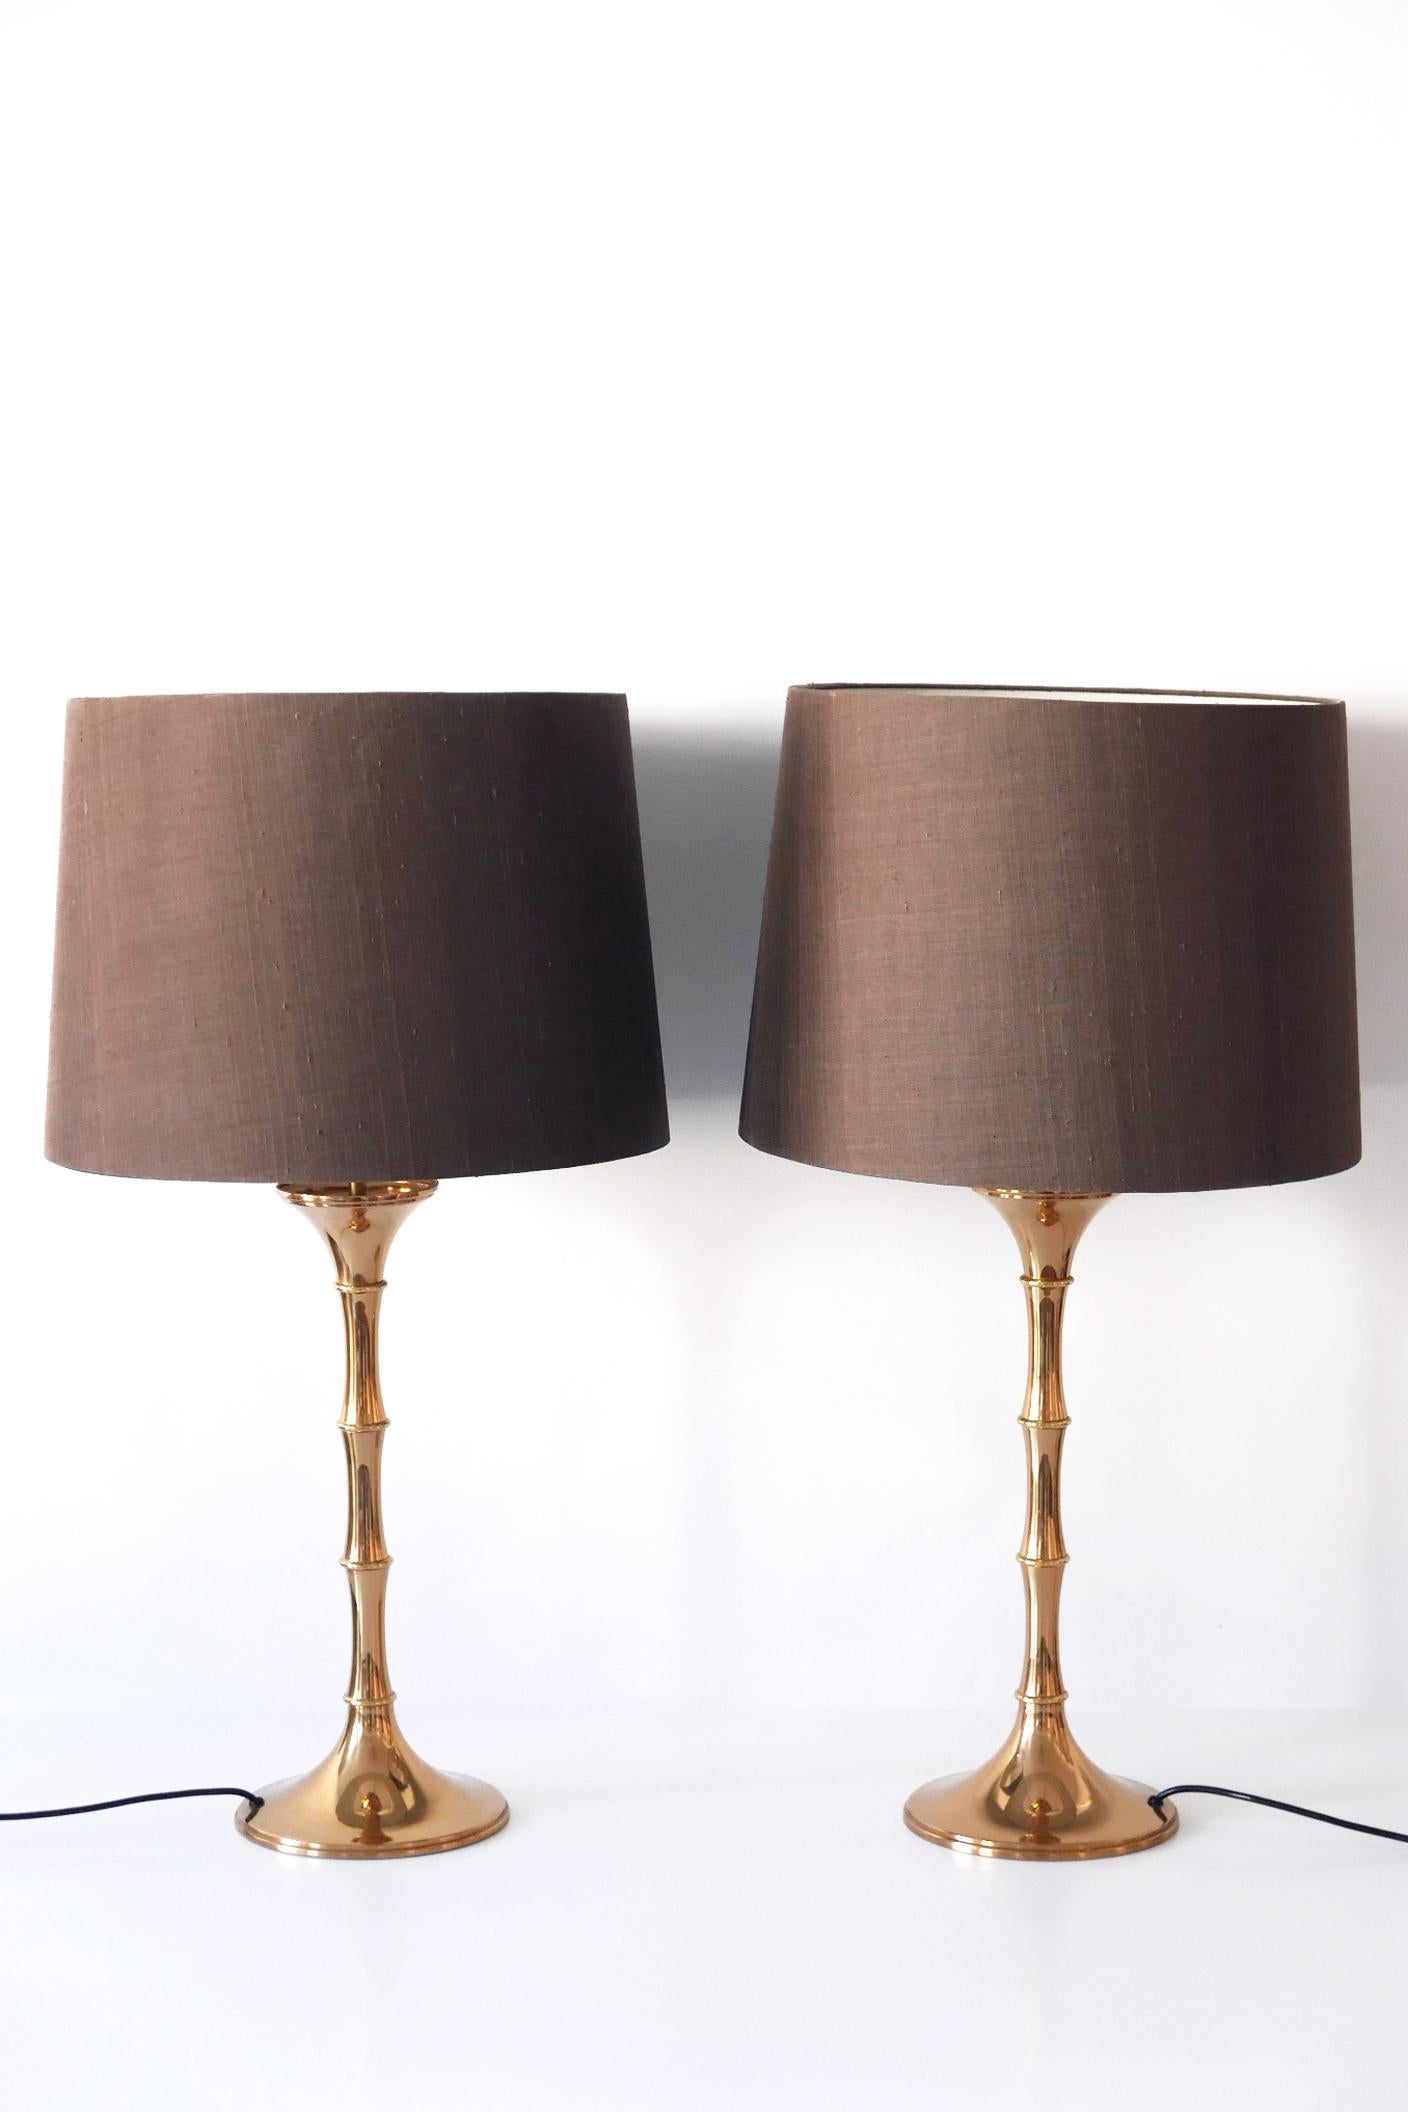 Mid-Century Modern Set of Two Midcentury Brass Bamboo Table Lamps ML1 by Ingo Maurer, 1968, Germany